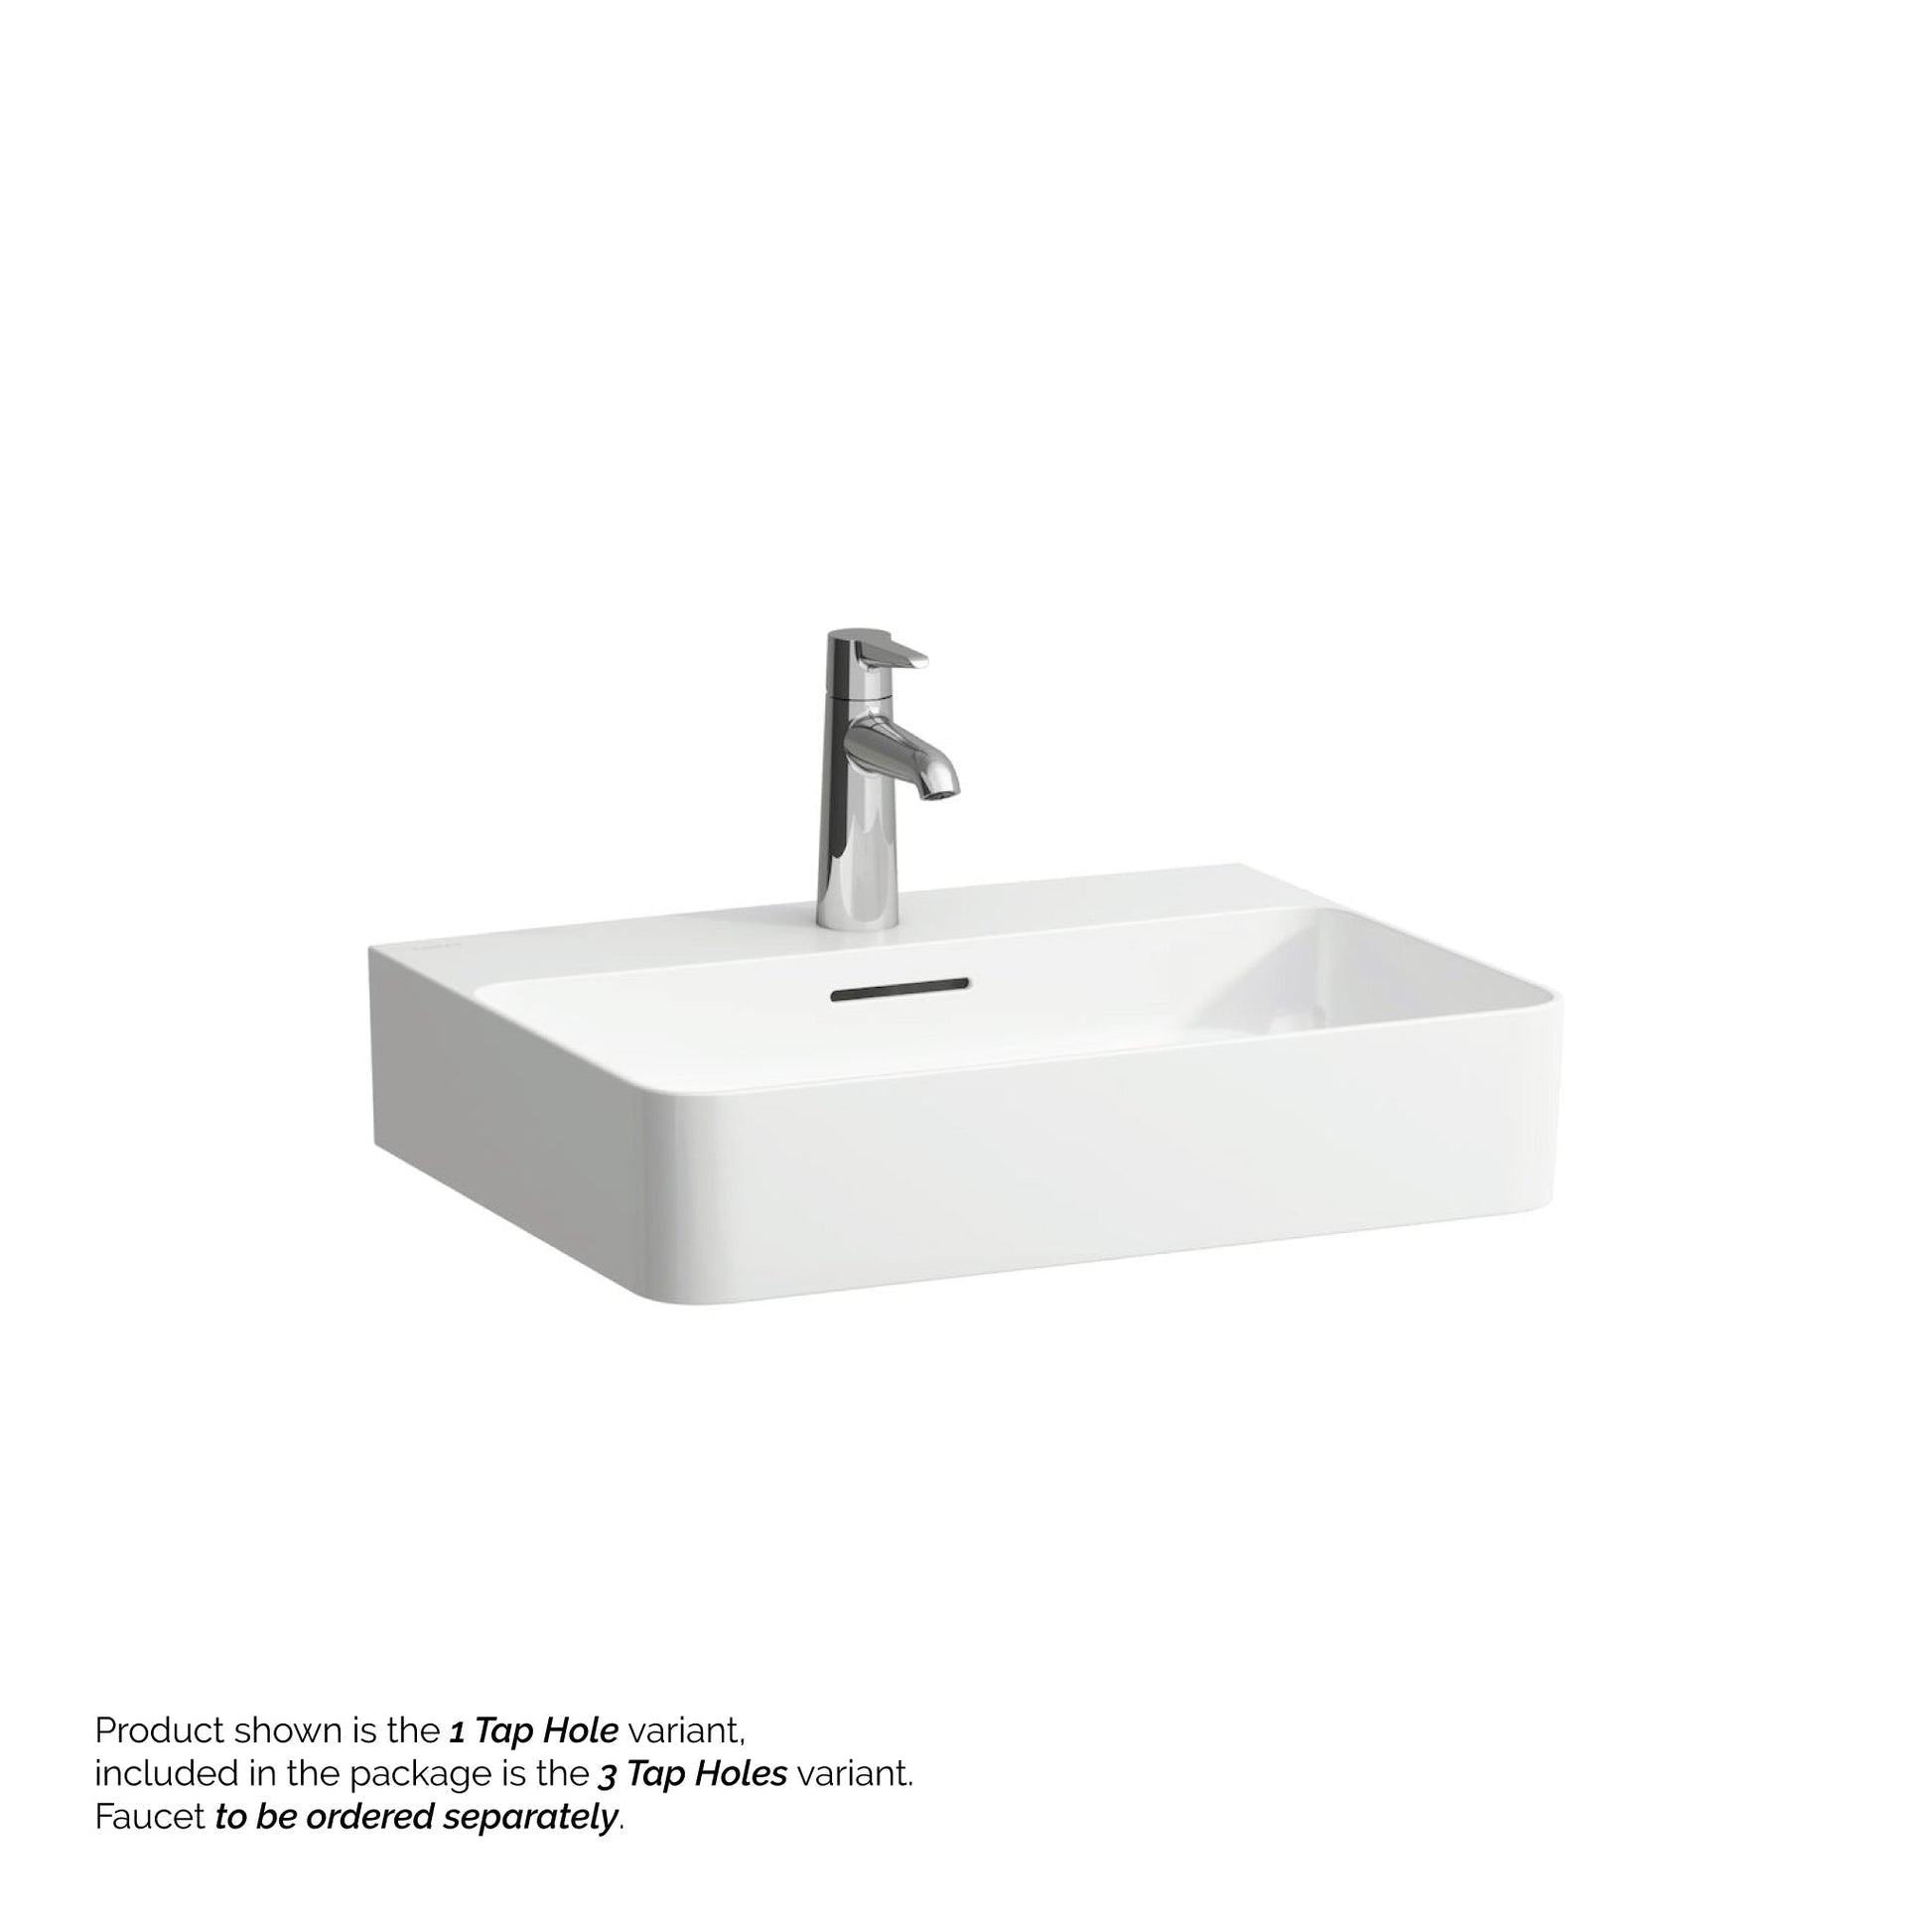 Laufen Val 22" x 17" Matte White Ceramic Wall-Mounted Bathroom Sink With 3 Faucet Holes